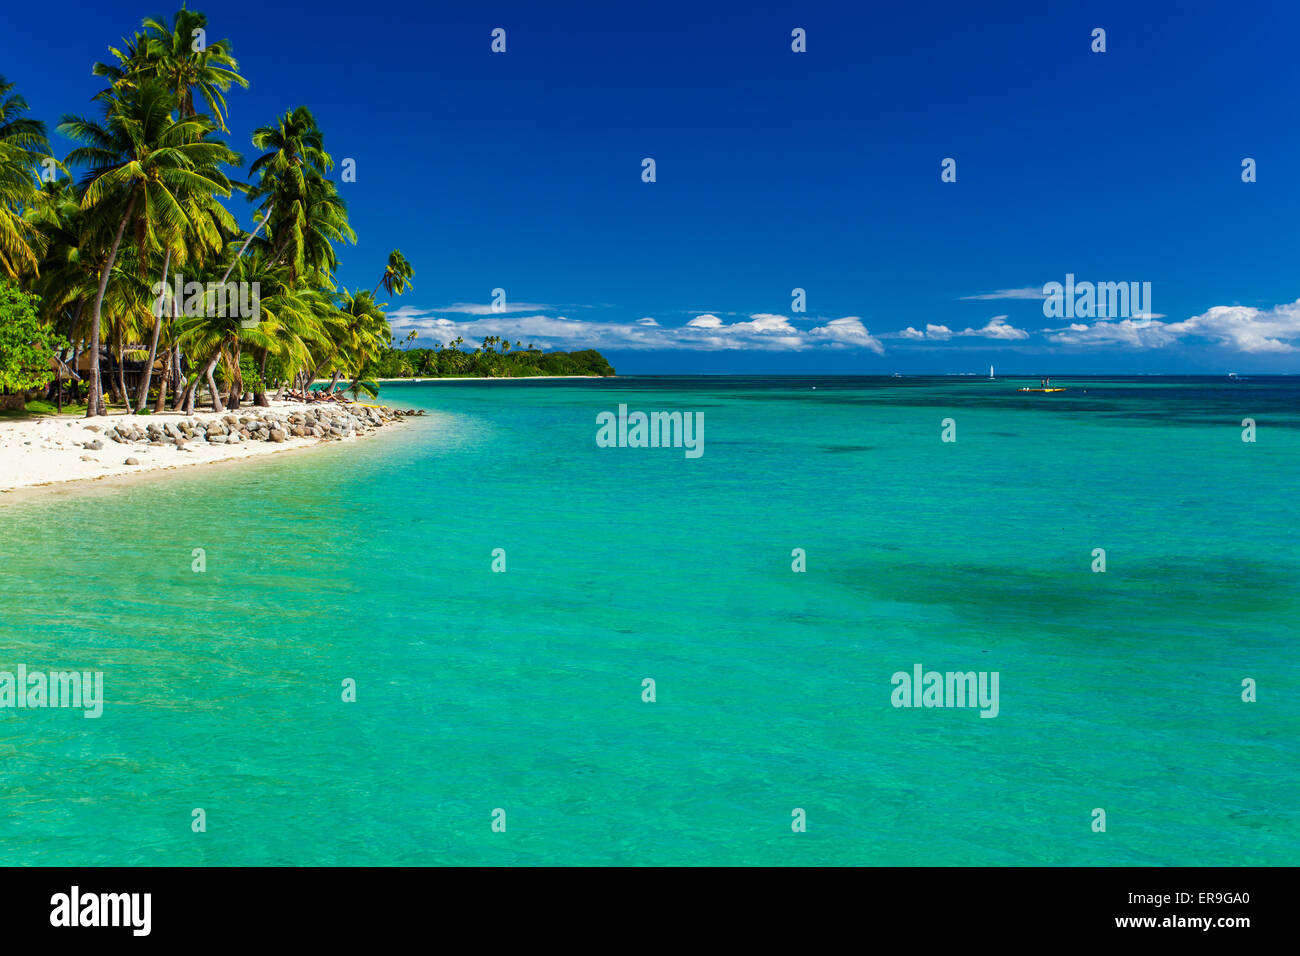 Tropical island in Fiji with sandy beach and pristine water Stock Photo